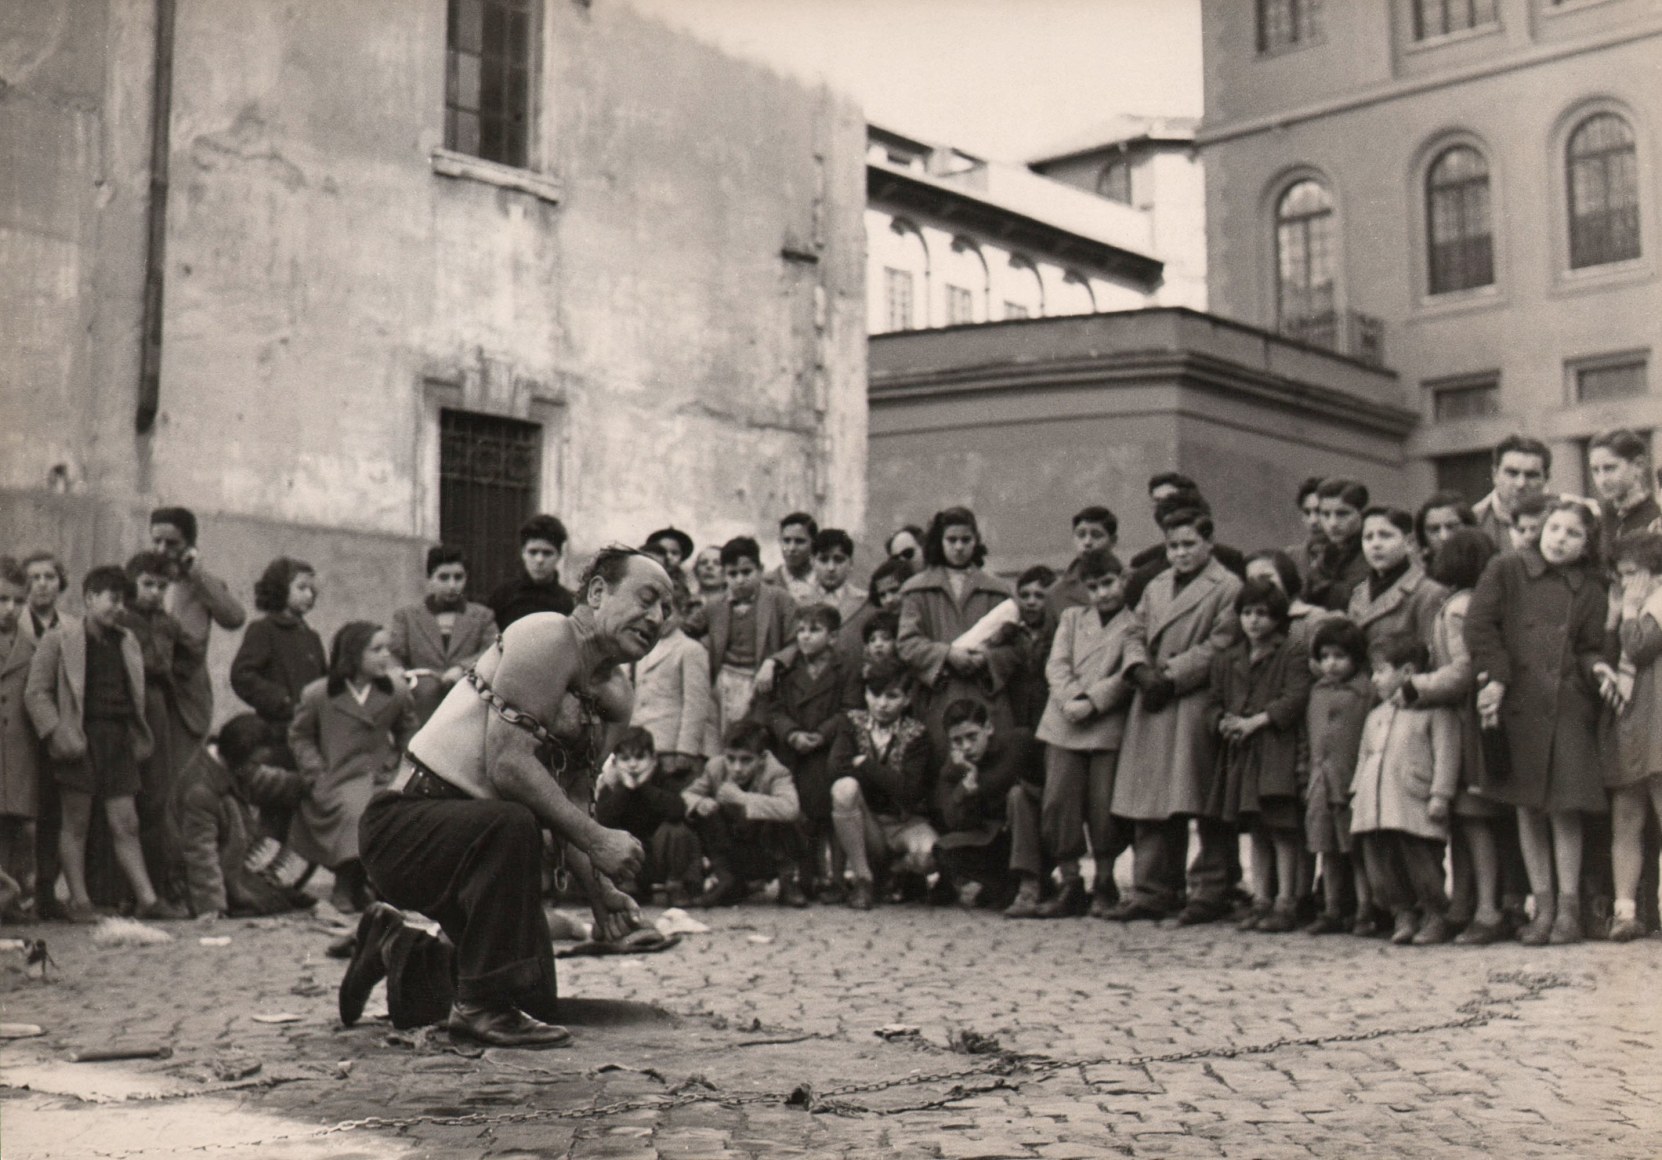 Franco Pinna, Roma - Panico, ​c. 1955. A street performer kneels with a thick metal chain around his chest and arms, a large group of children looking on in the background.